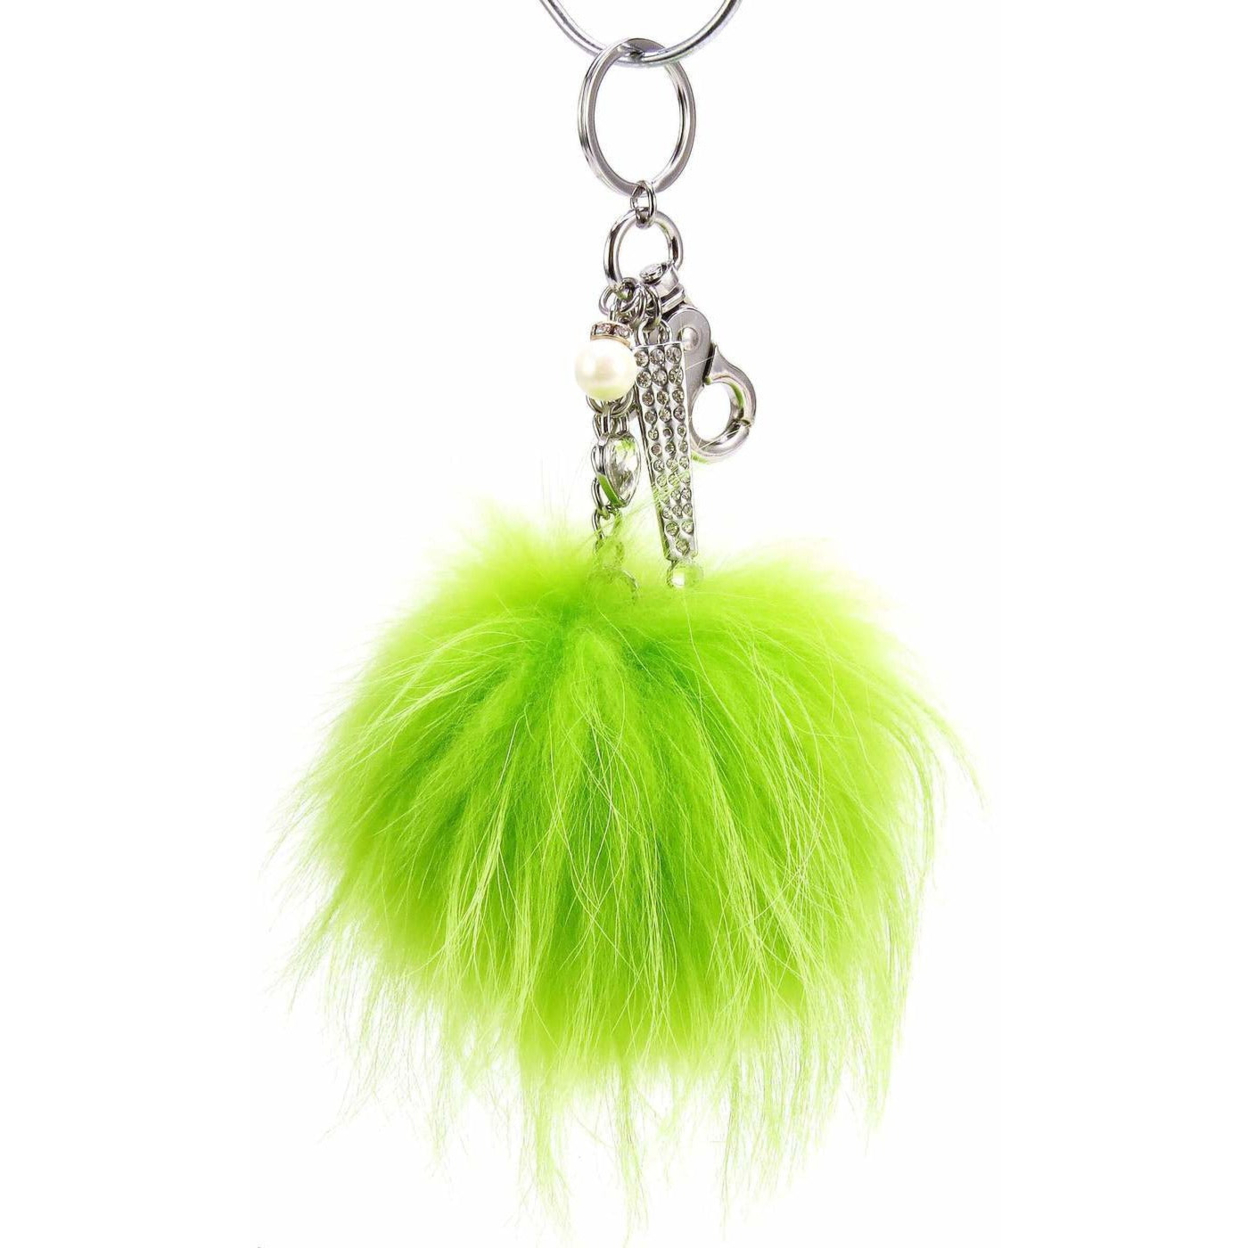 Real Fur Puff Ball Pom-Pom 6 Accessory Dangle Purse Charm - Lime Green With Silver Hardware